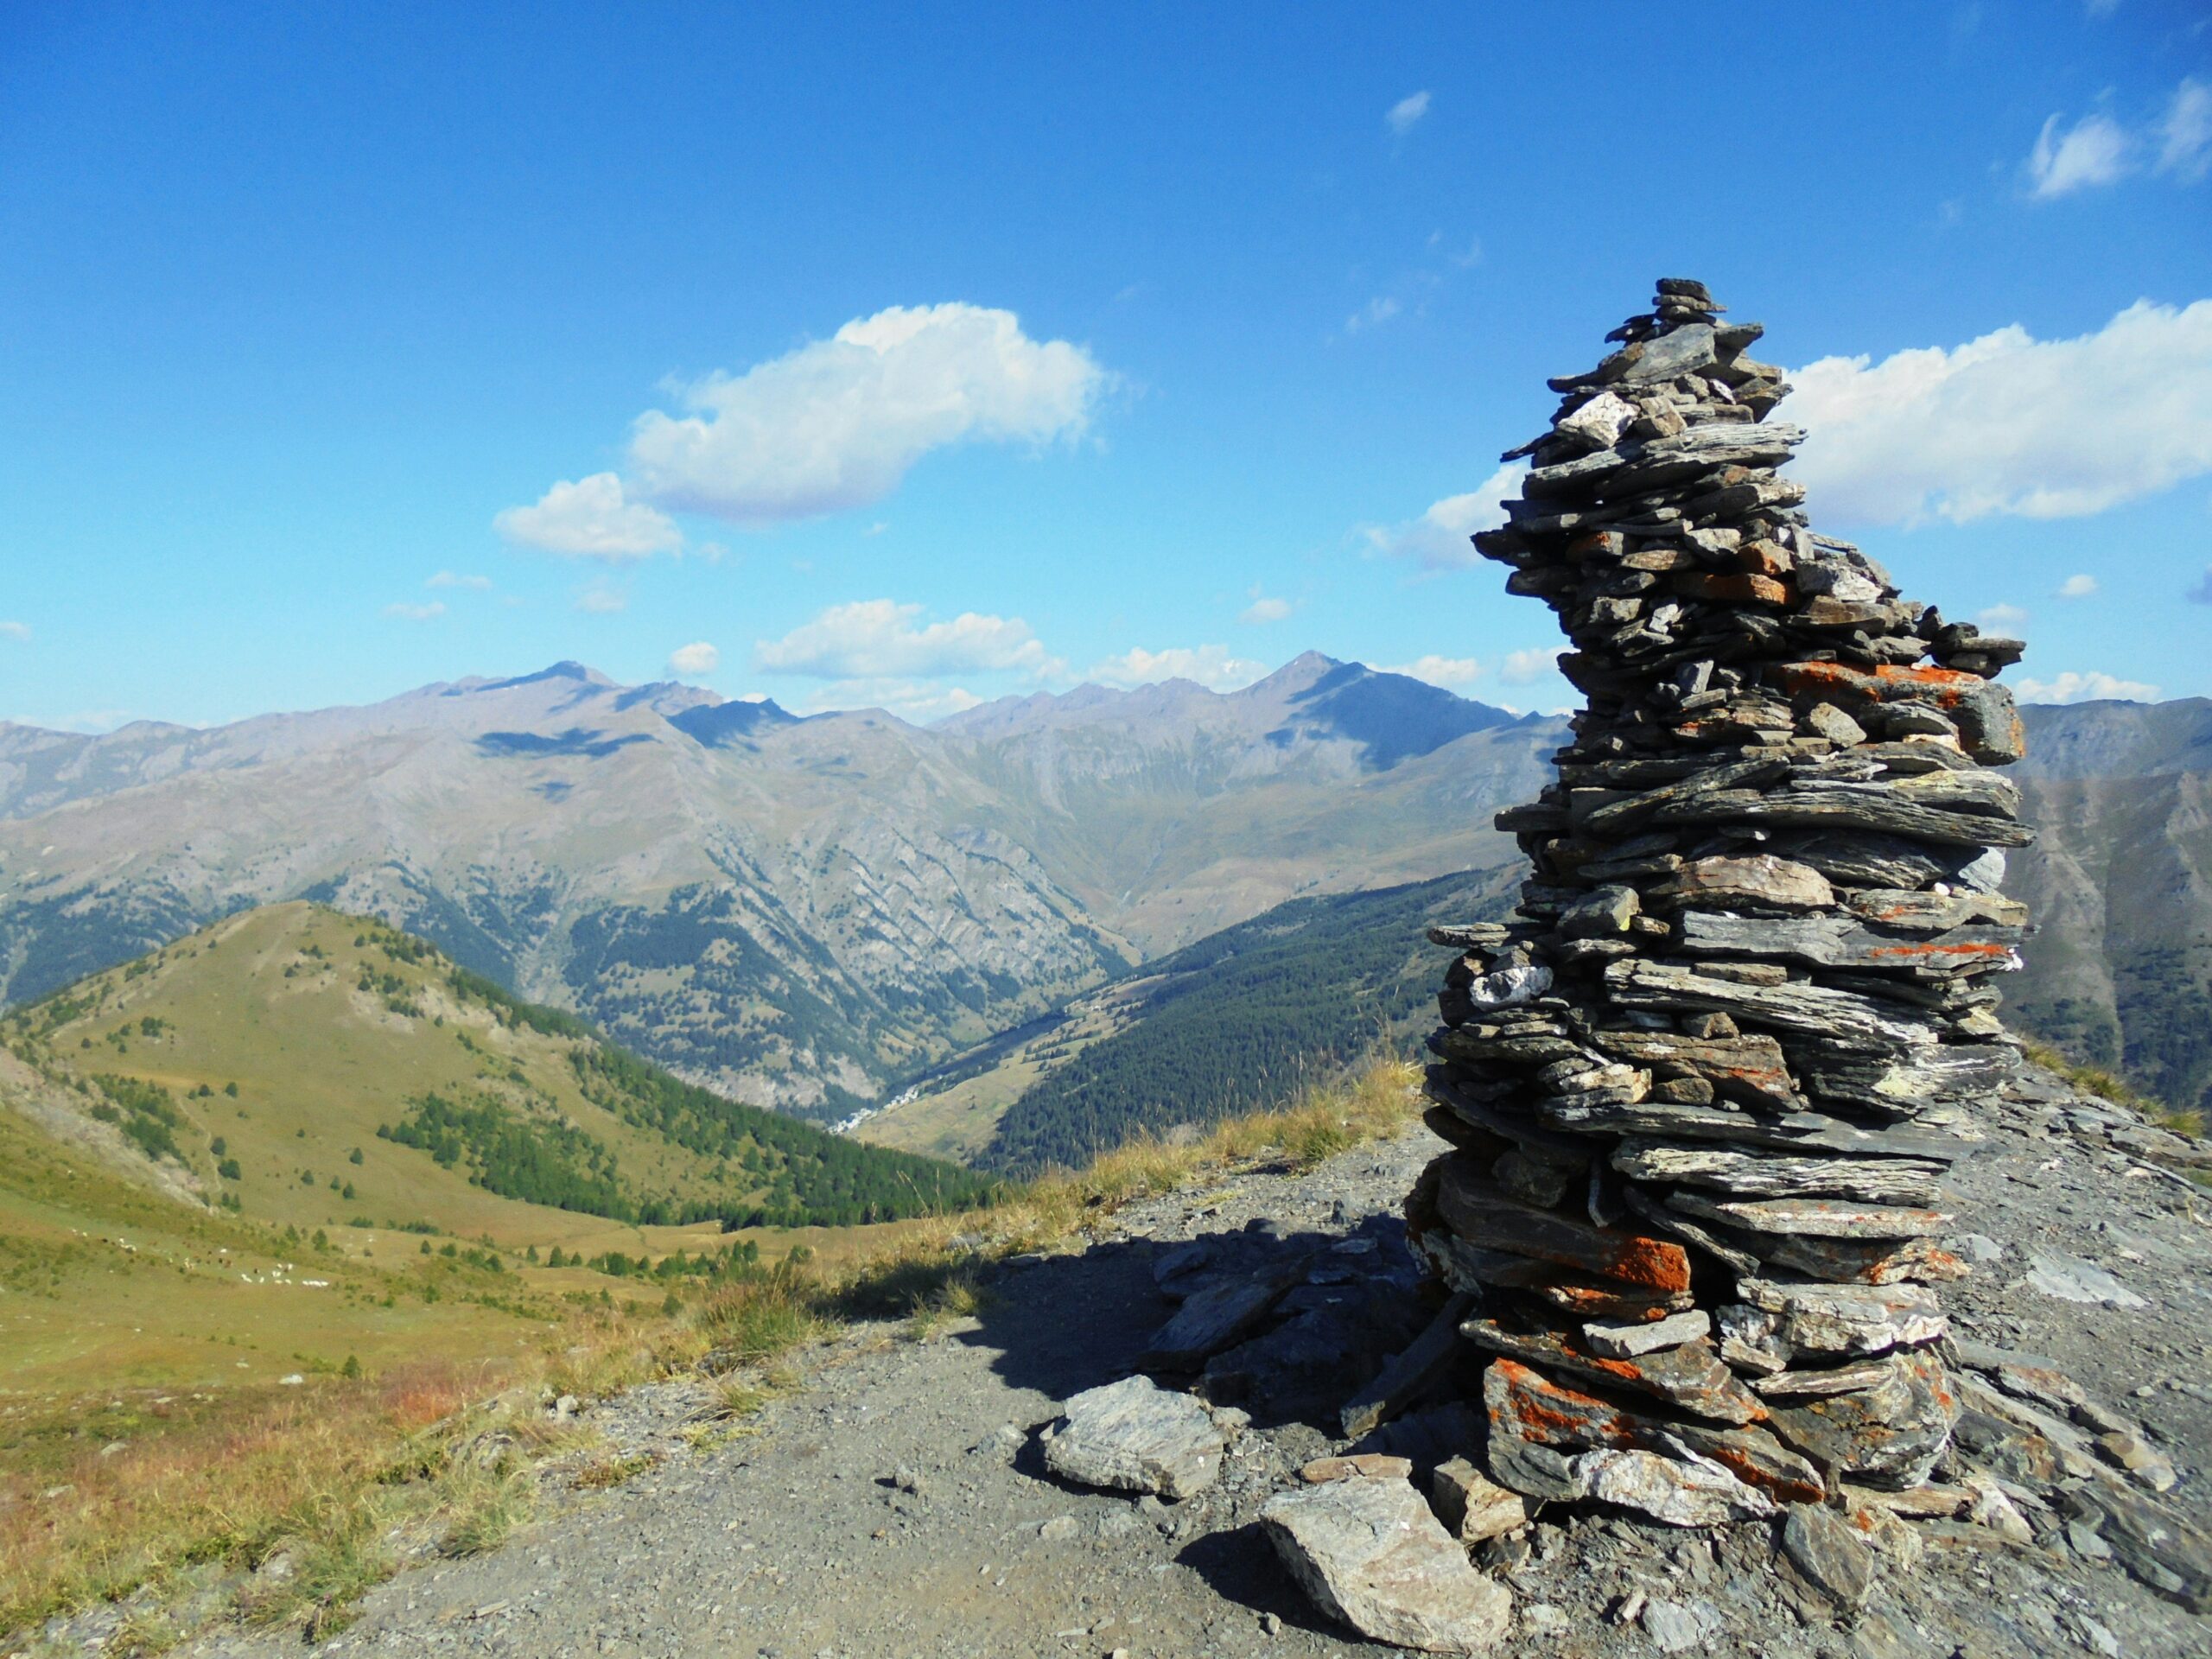 A cairn on the Gilly crest trail